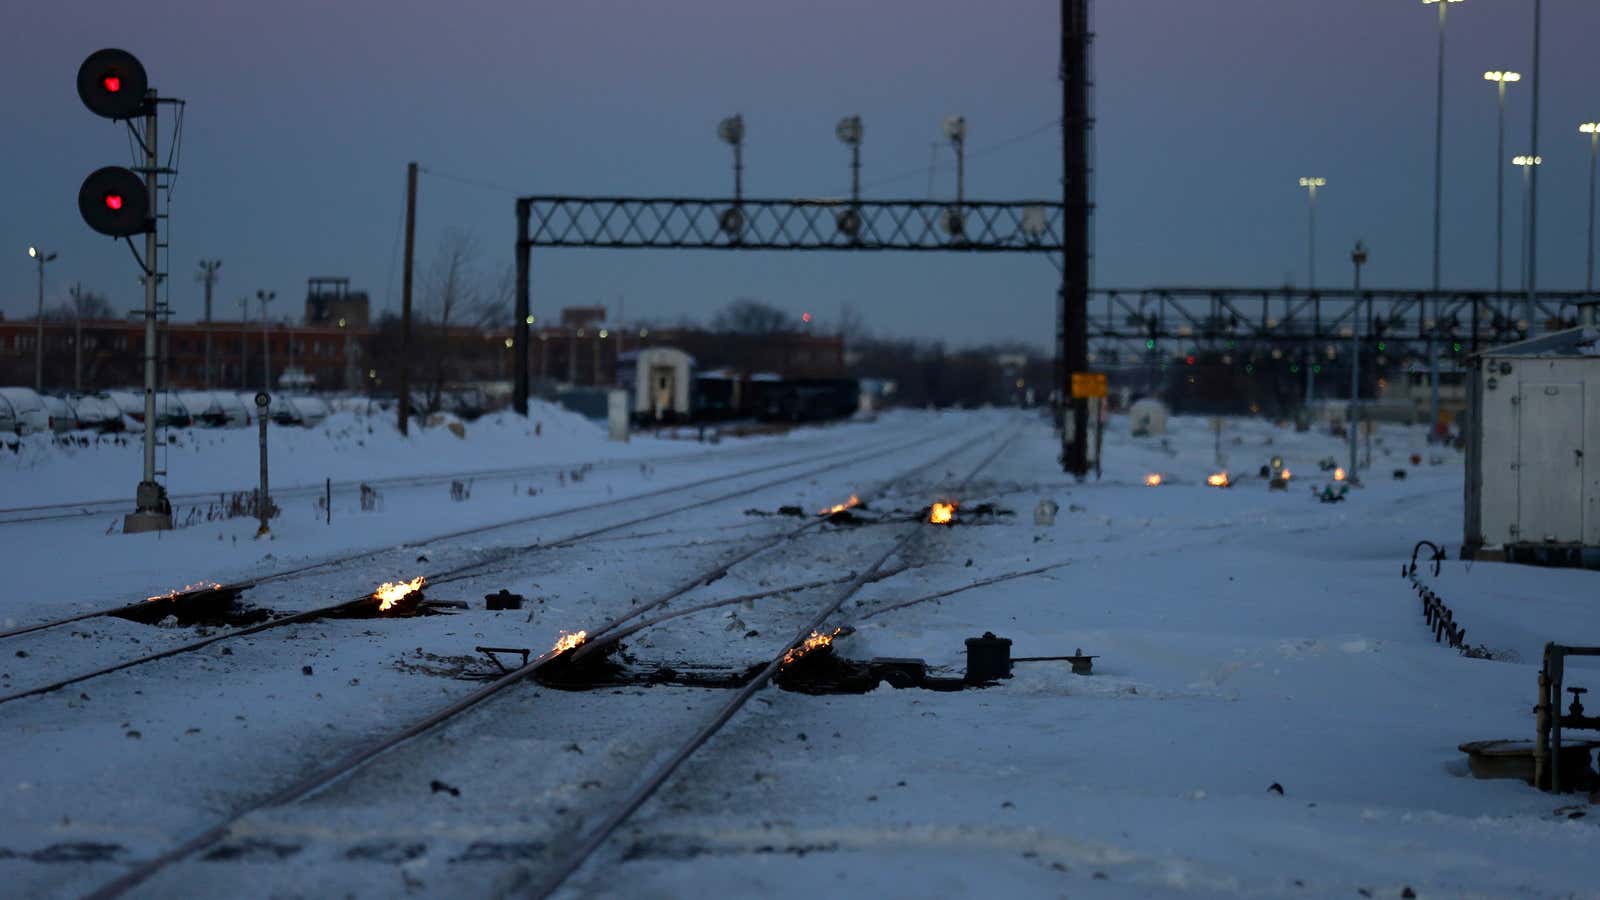 Gas-fired switch heater on the rails keeps the ice and snow off the switches near a train station in Chicago on Jan. 29.